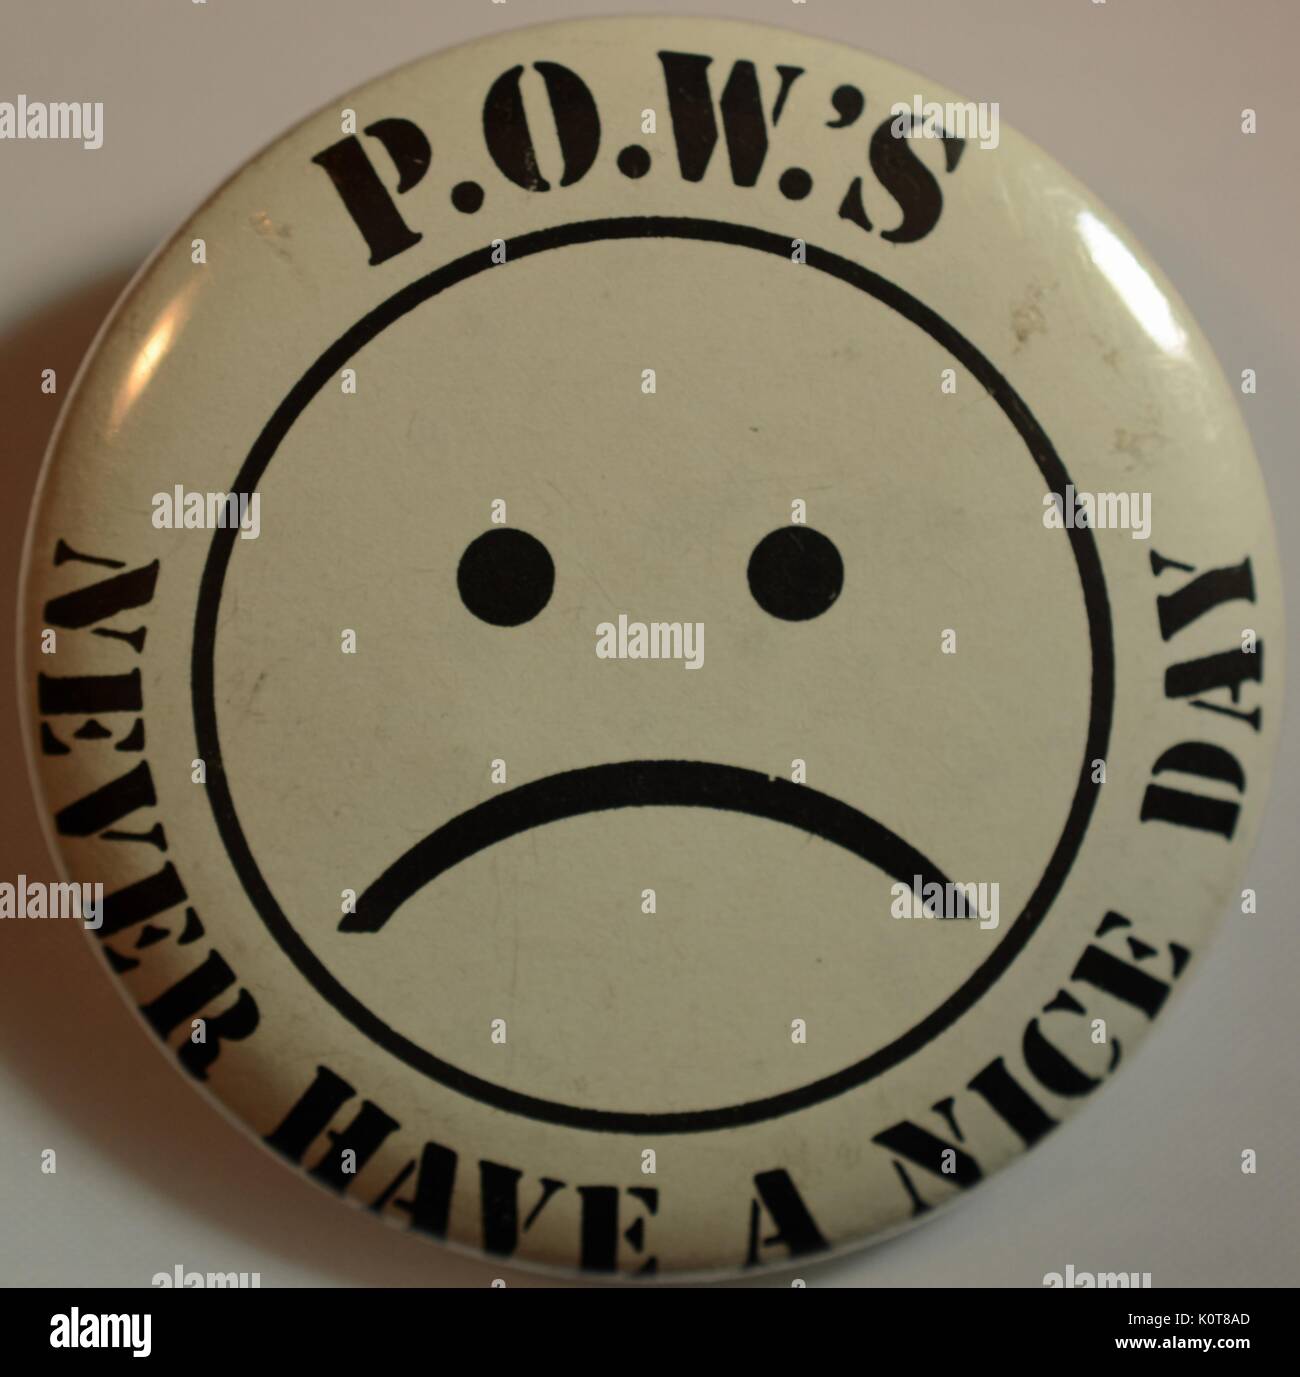 A pin featuring the cartoon representation of a sad, frowning face with the words 'P.O.W.'s never have a nice day', created to maintain awareness of the United States soldiers who were Prisoners of War or Missing in Action in Vietnam, 1968. Stock Photo